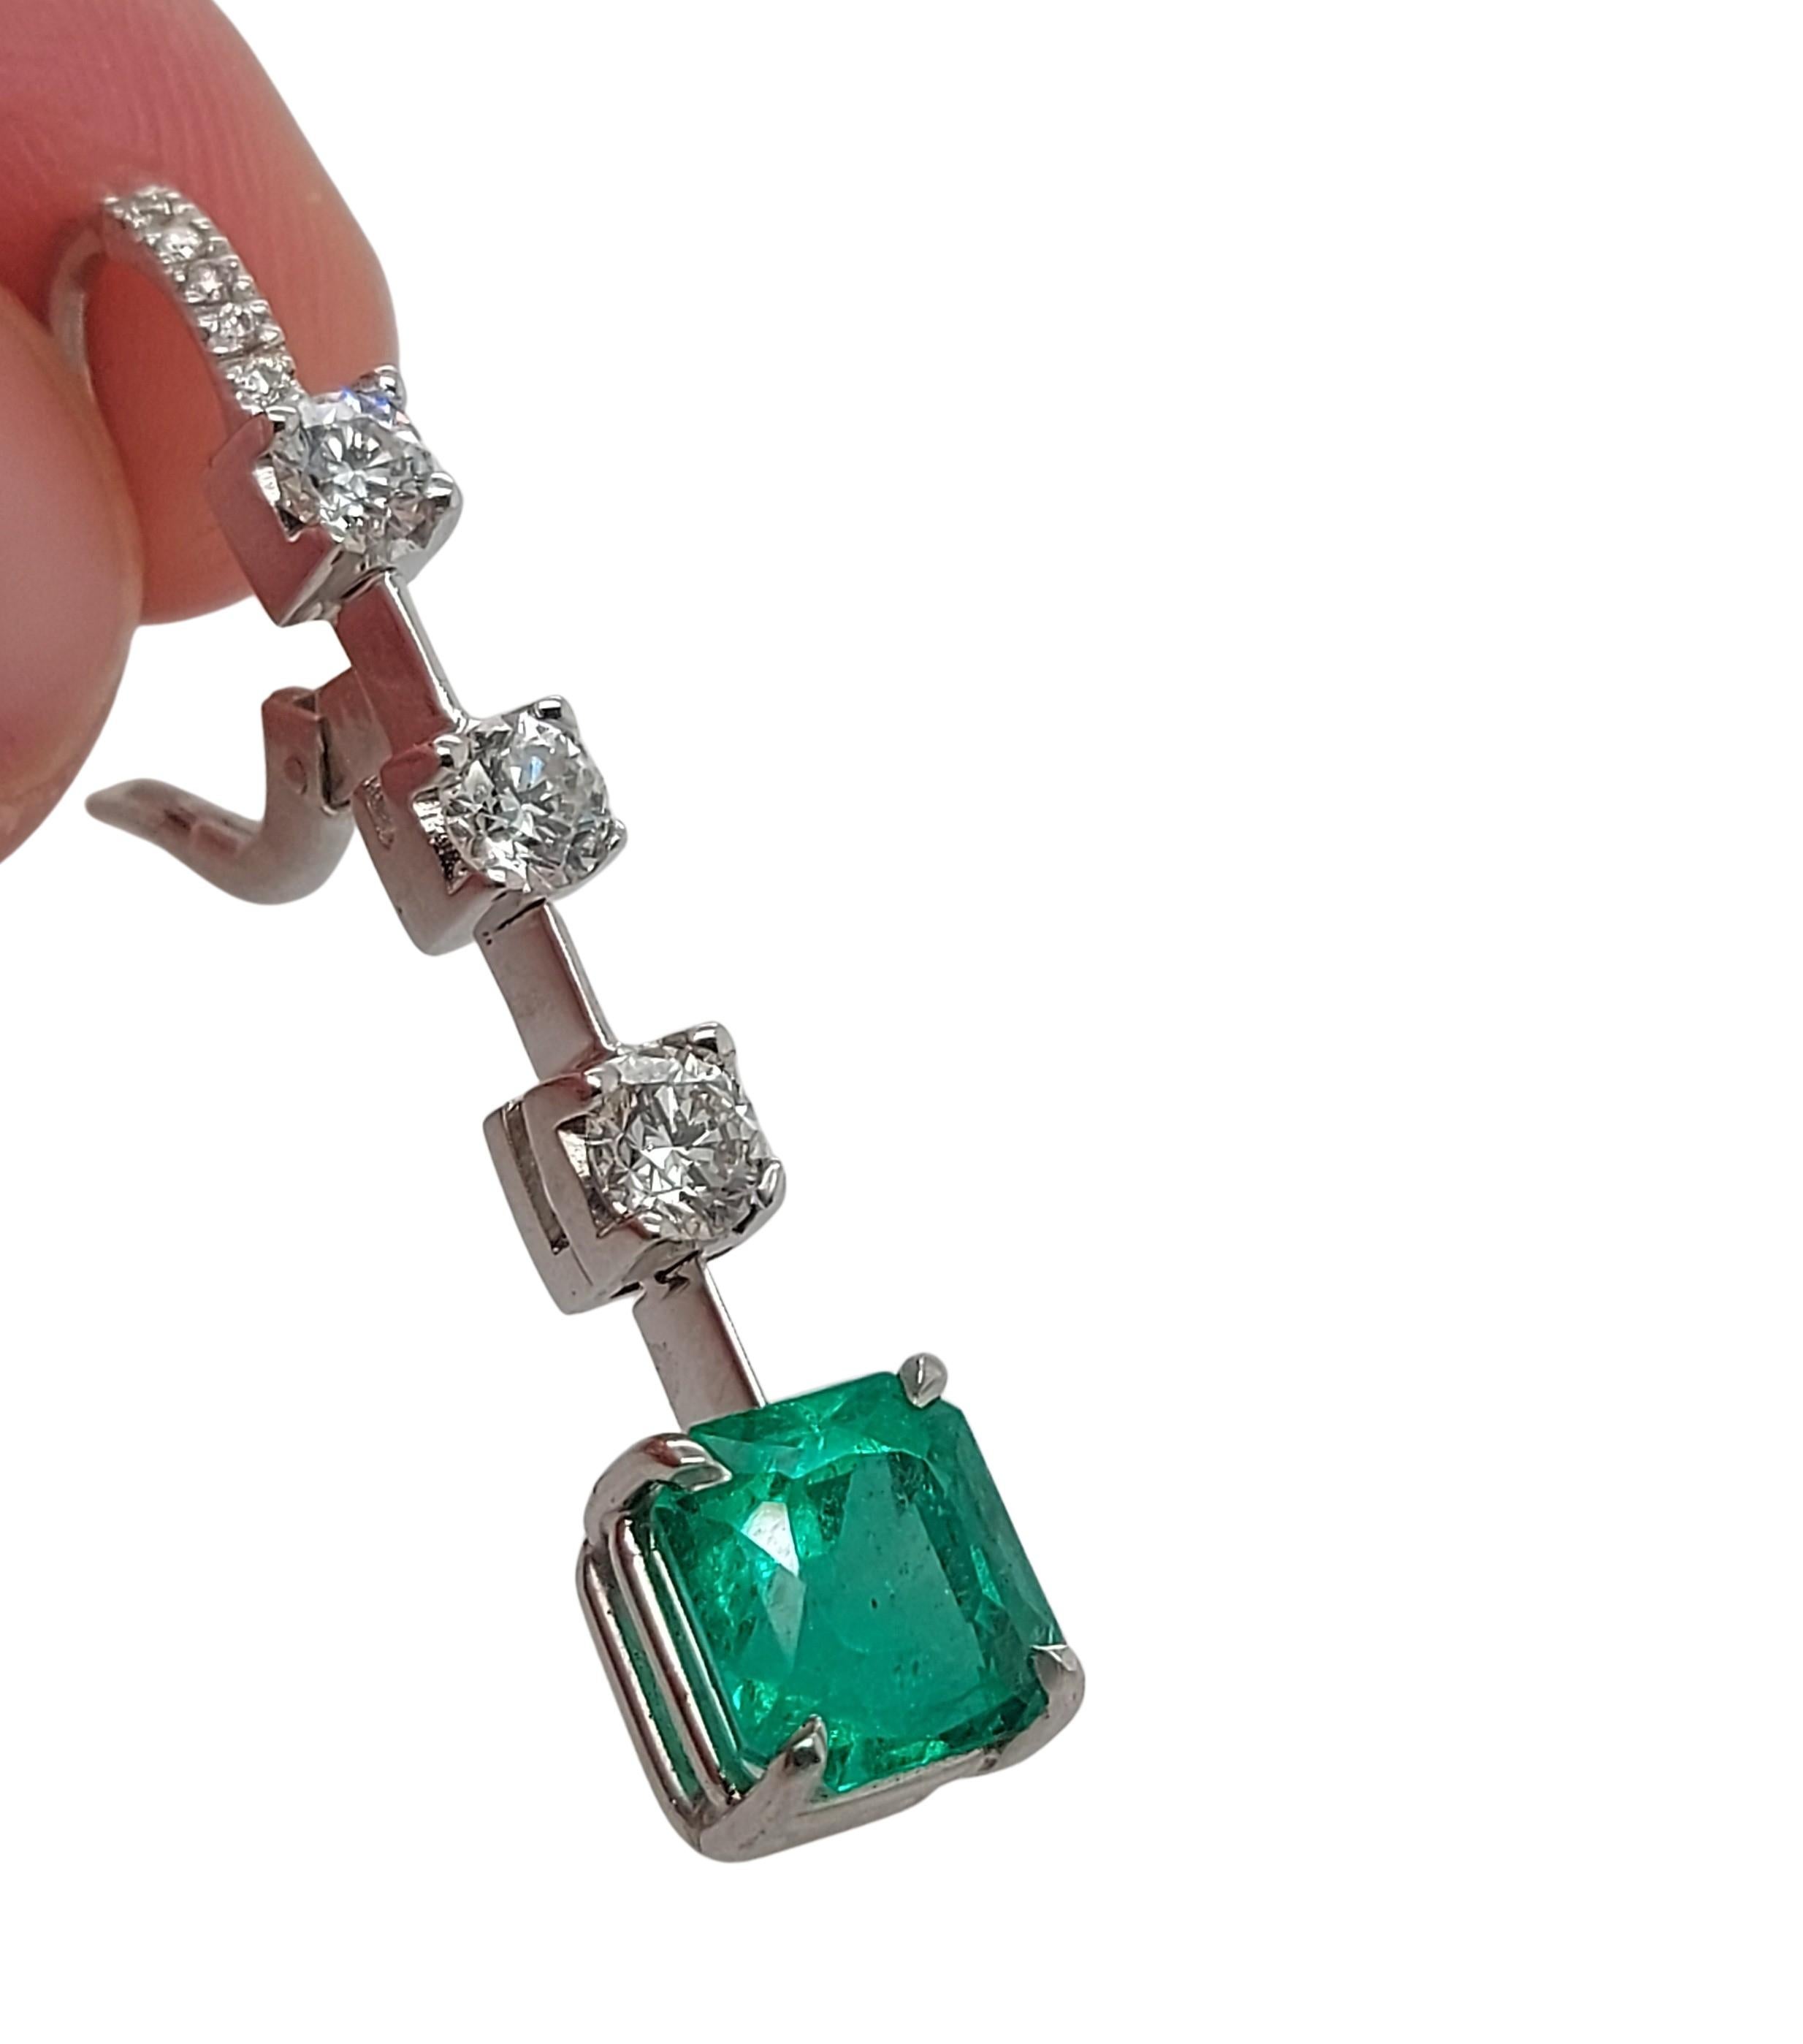 Octagon Cut Magnificent Dangling Earrings with 5.29ct Colombian Emerald, 1.51ct Diamonds For Sale